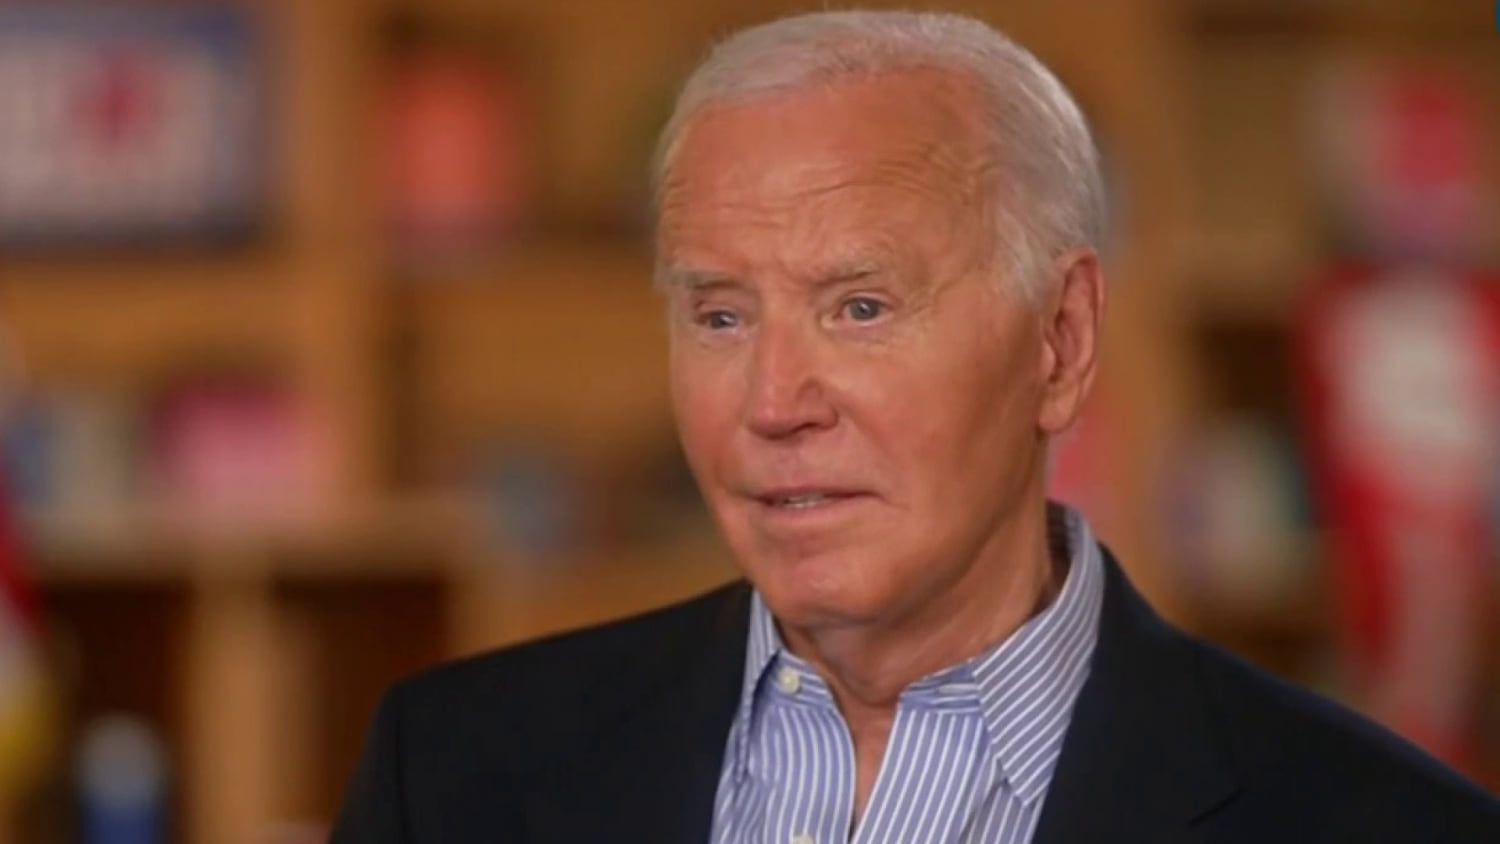 'I was exhausted': Biden addresses first debate performance during interview